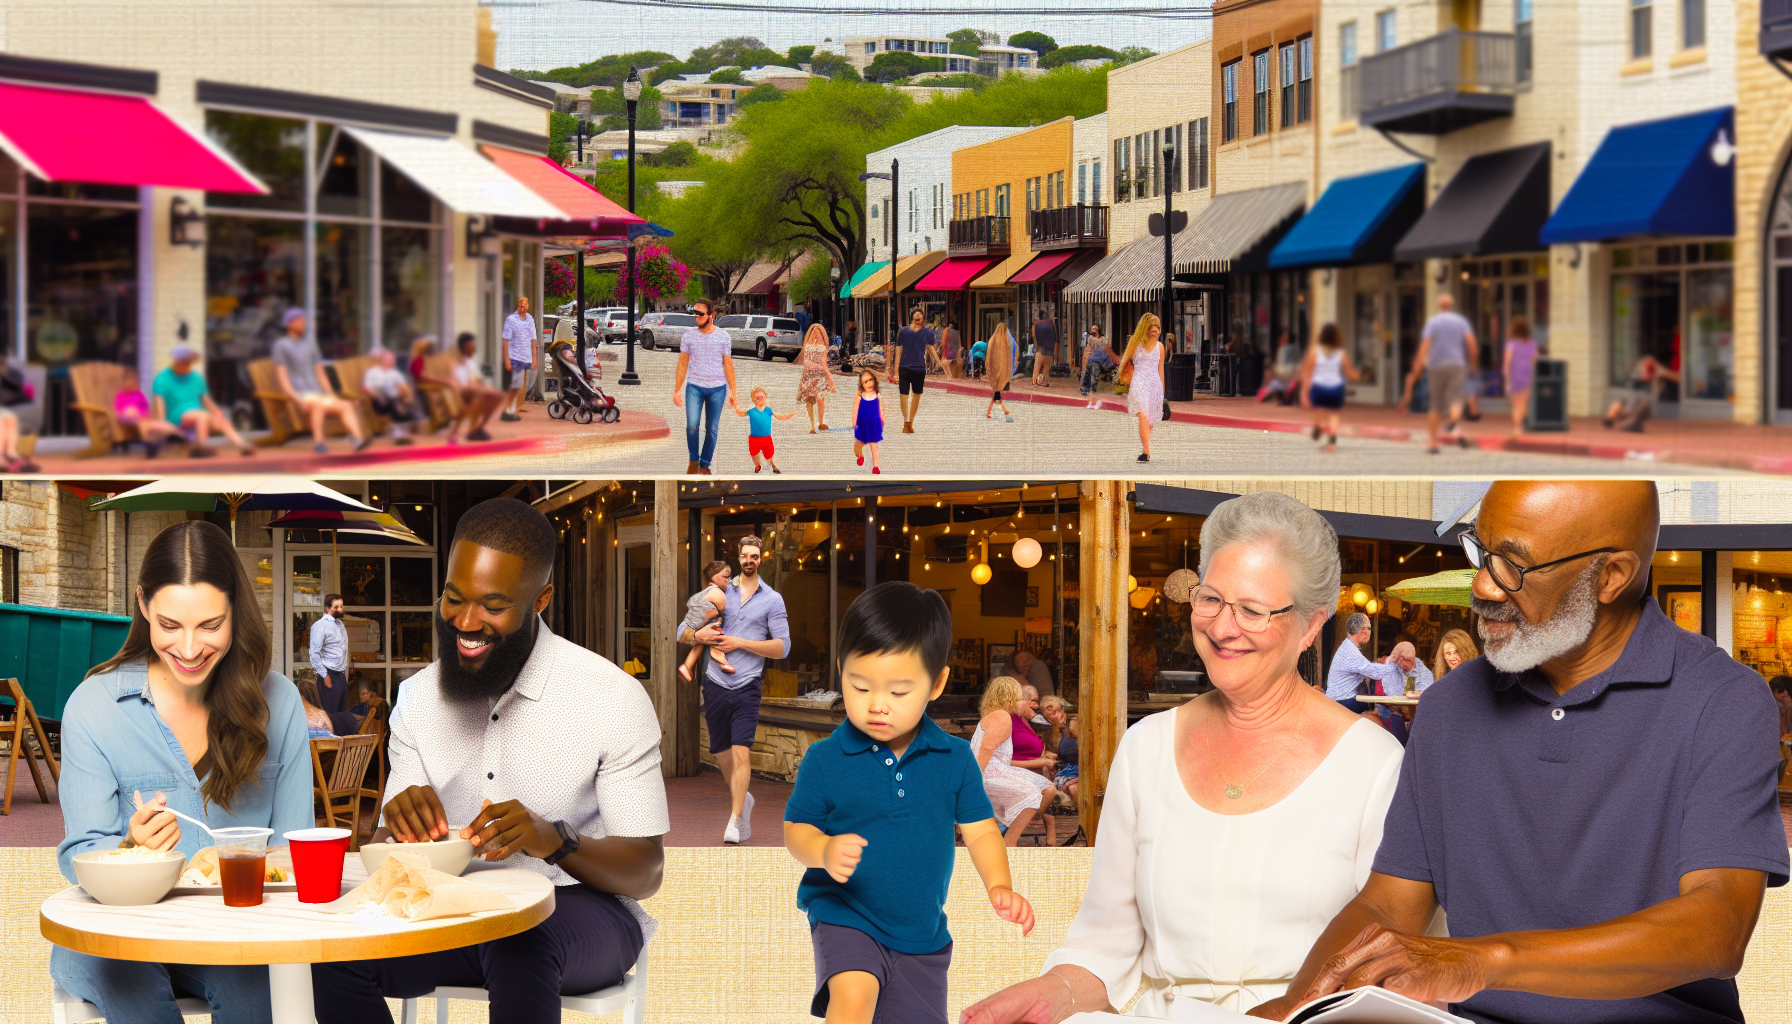 Downtown street with shops and restaurants in Cedar Park vs Leander